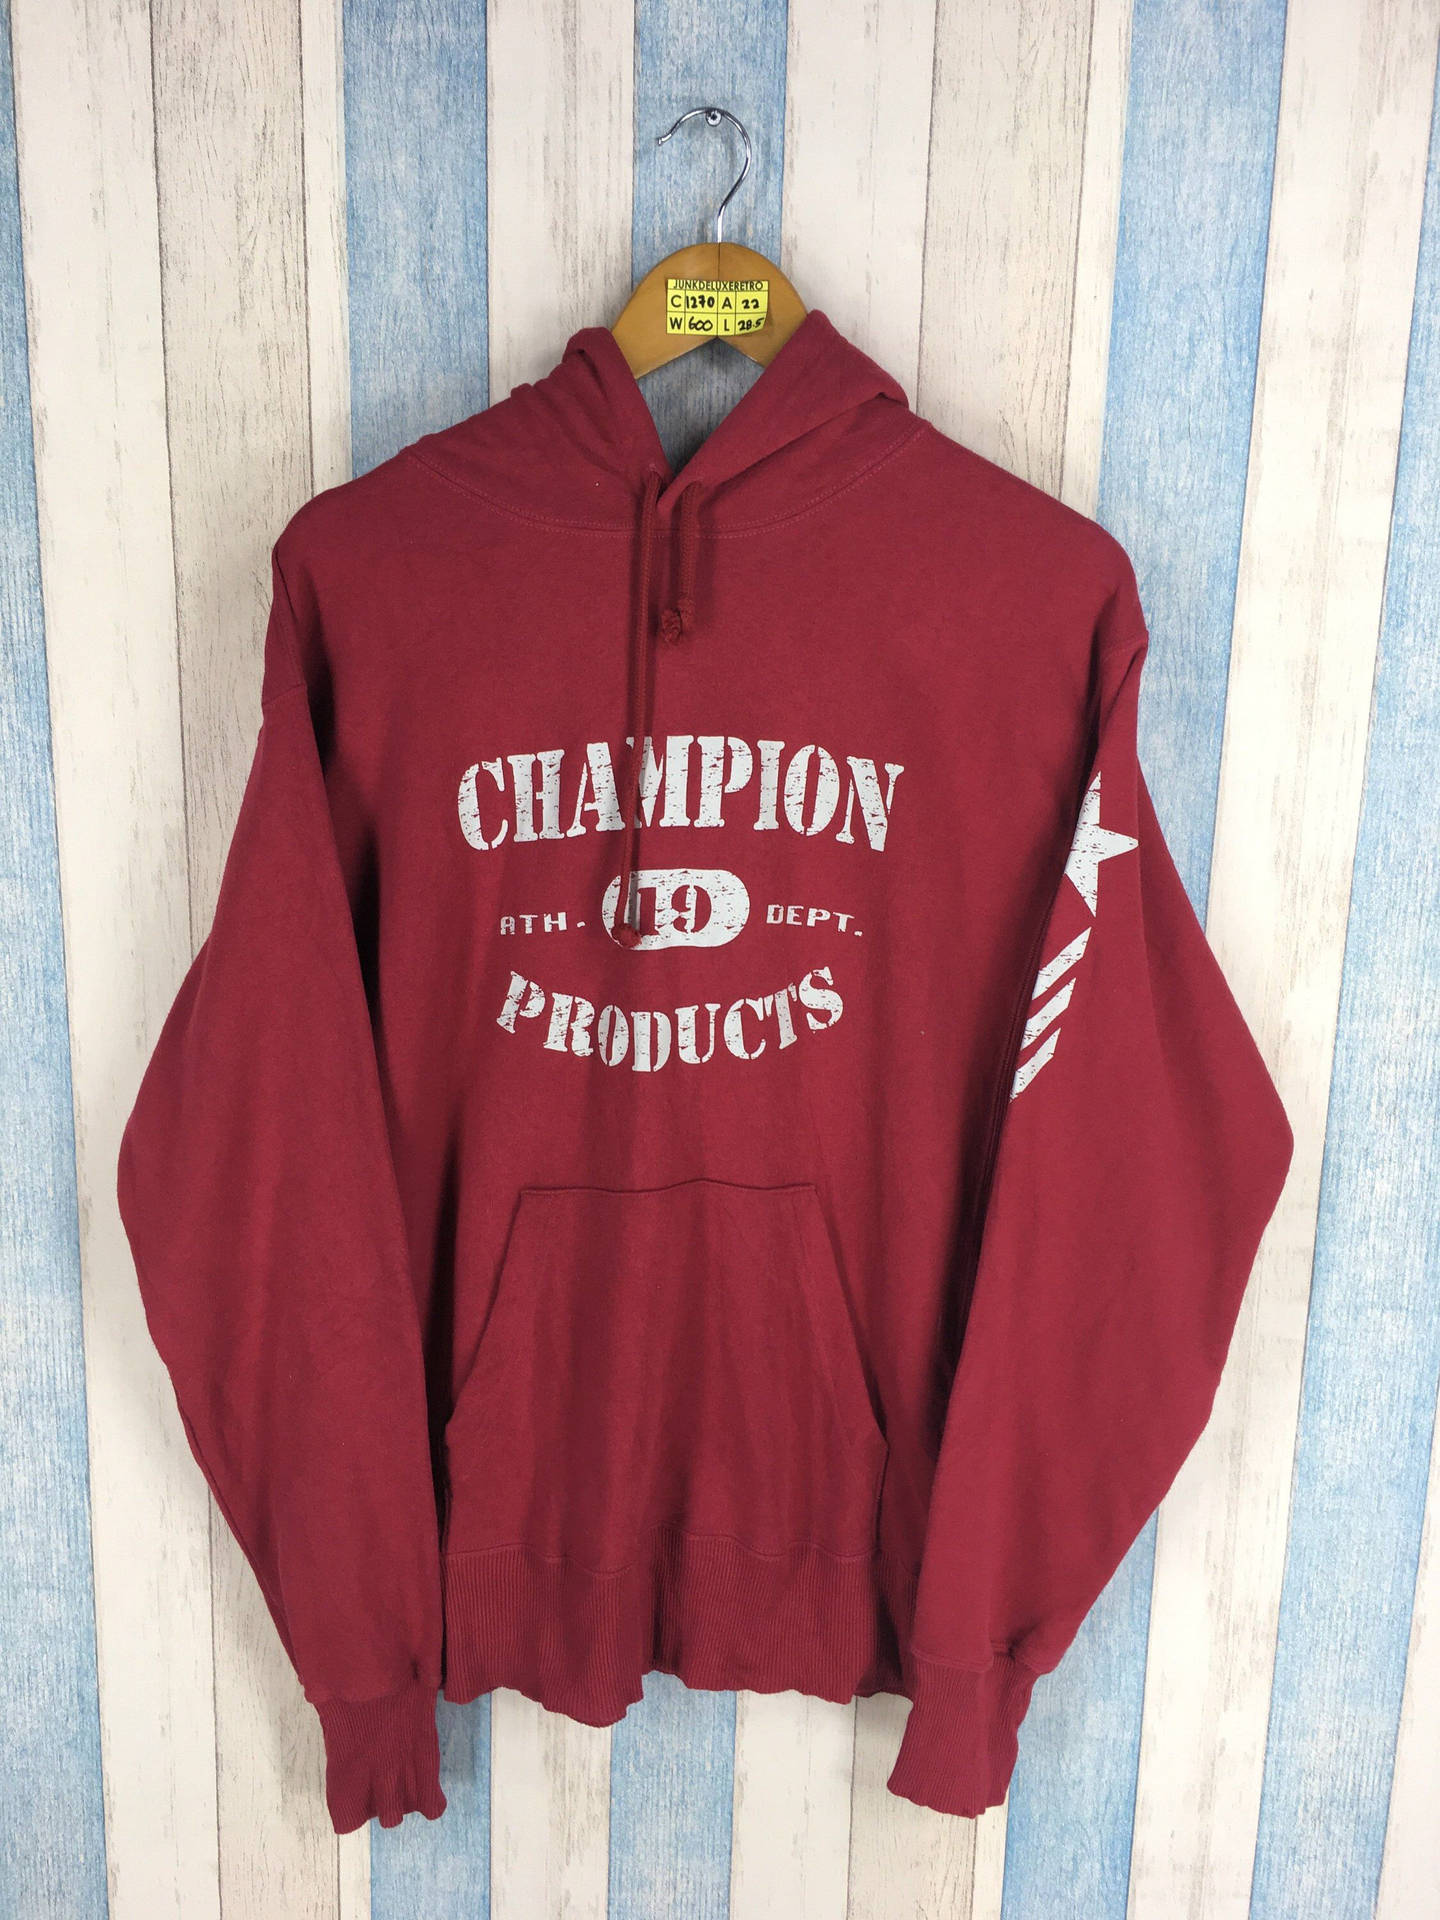 Champion Red Worn-out Jacket Wallpaper